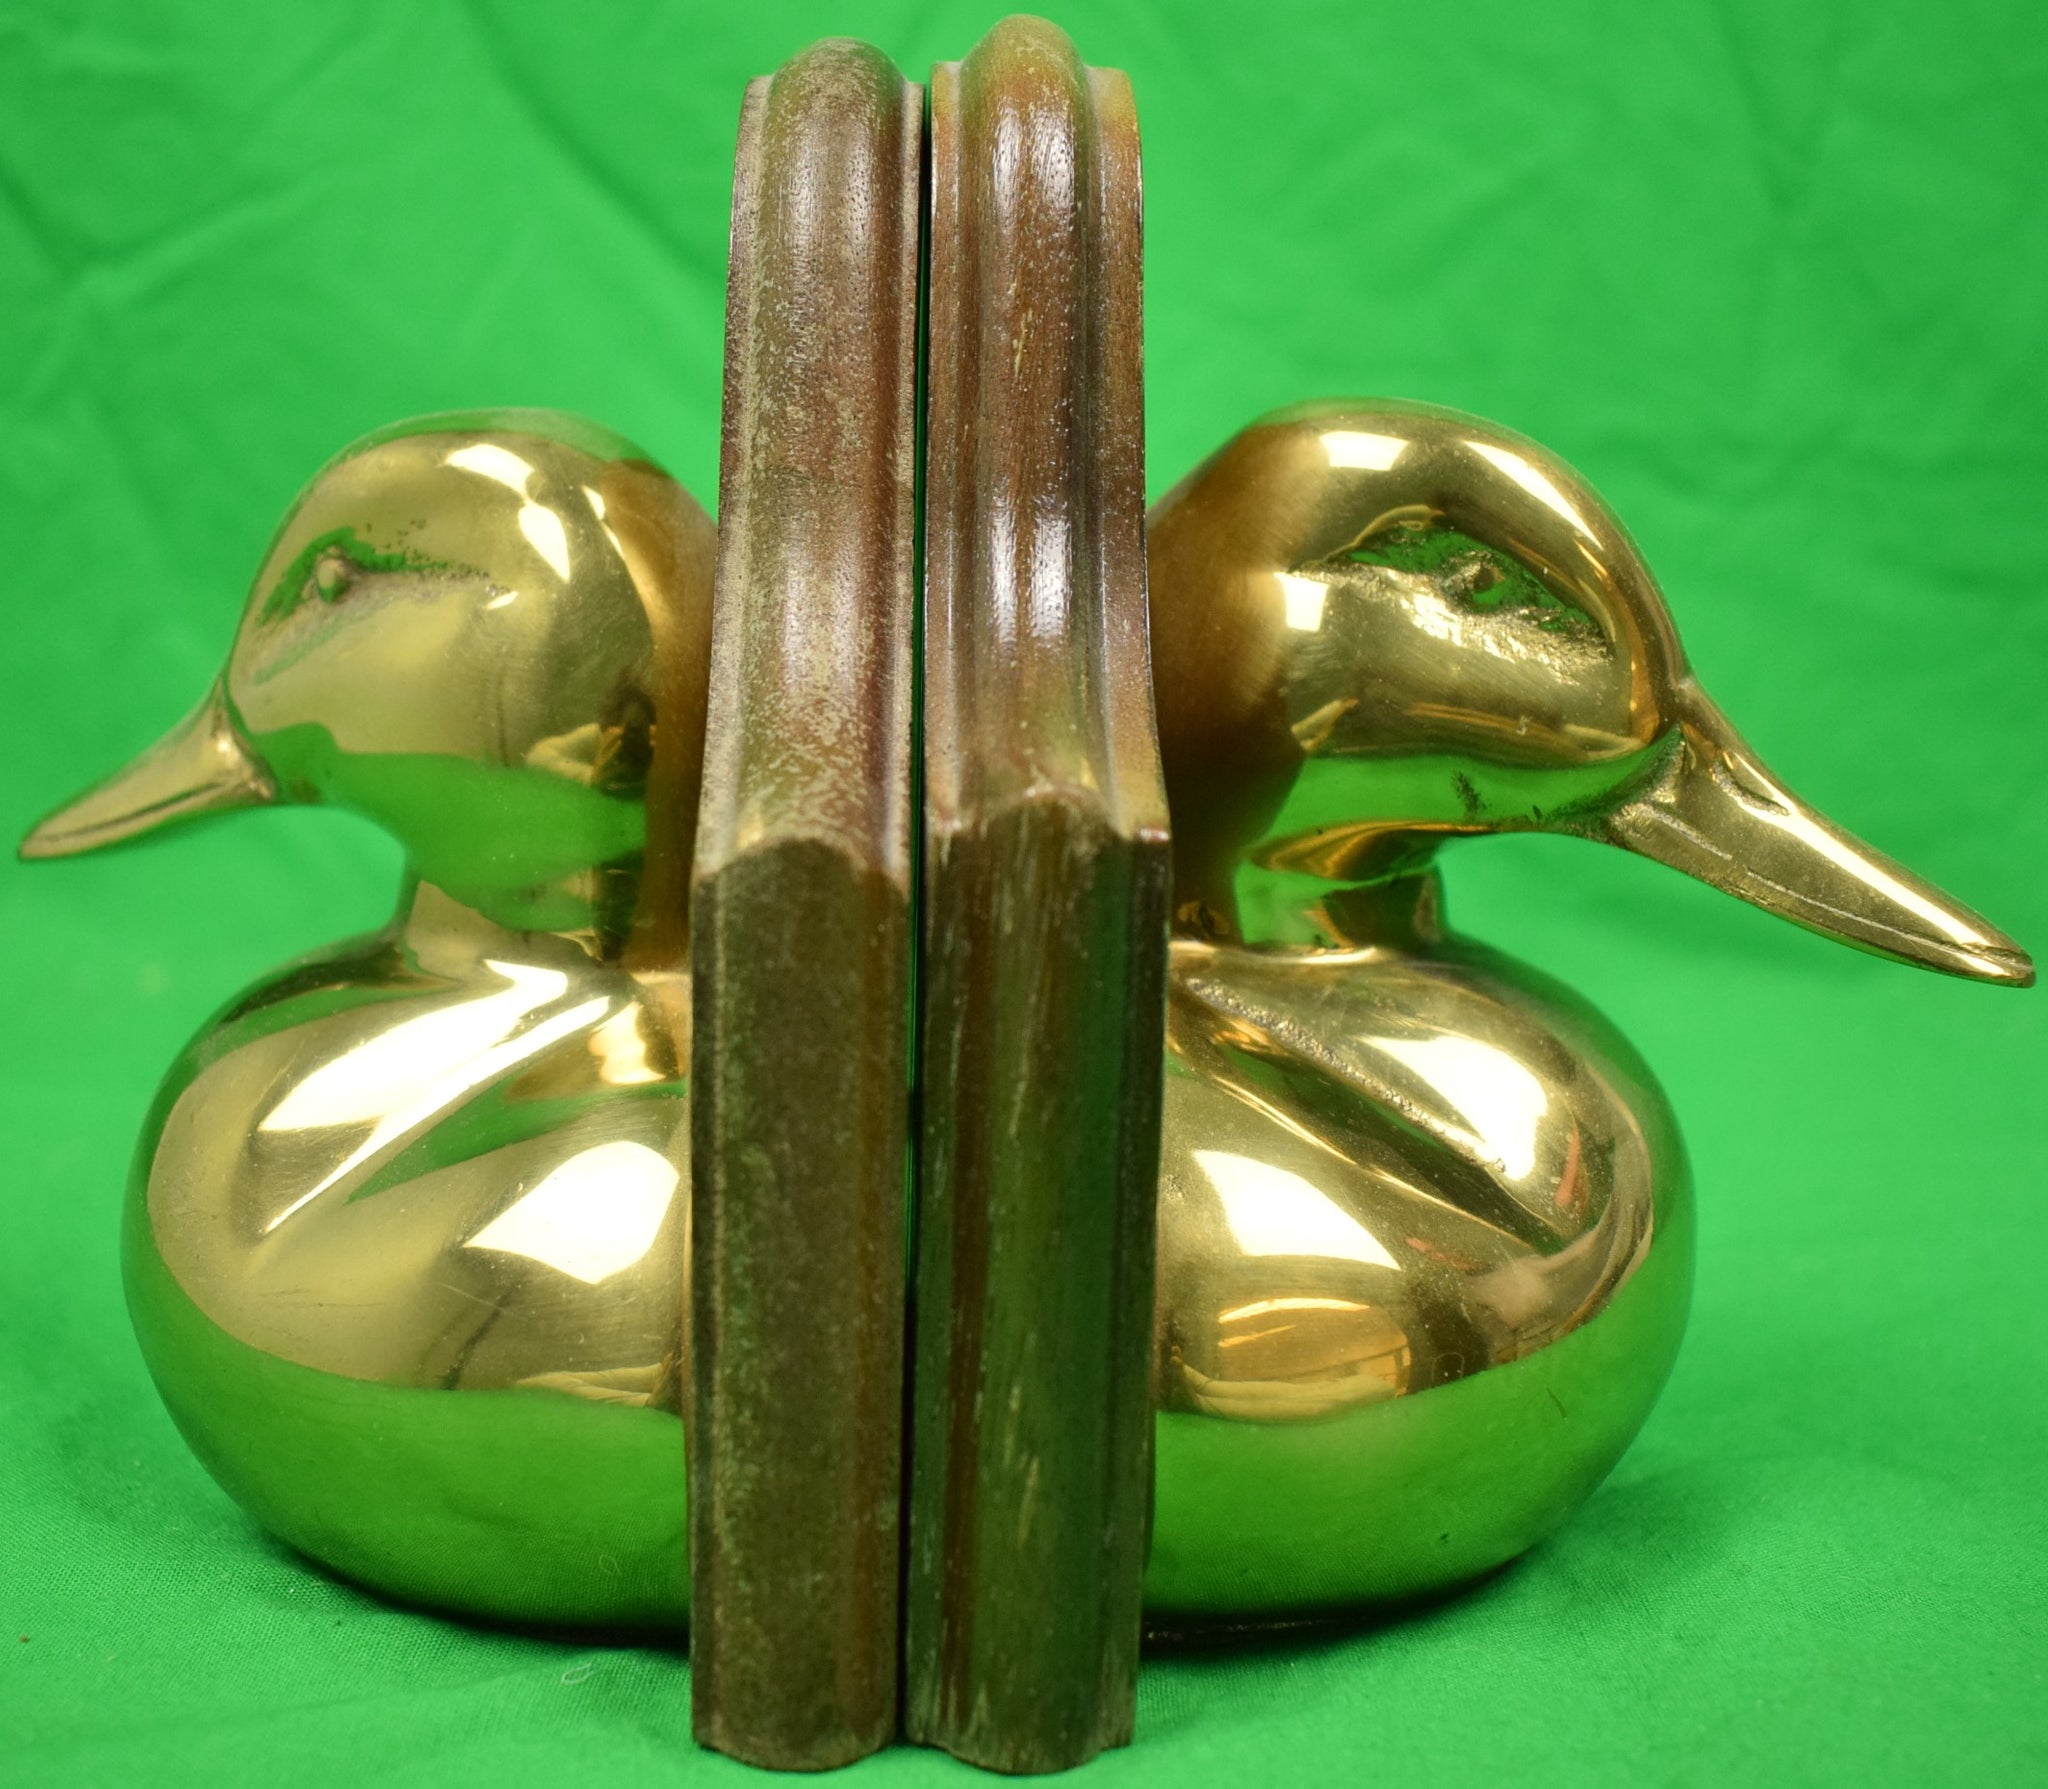 Pair of Tall Brass Duck Head Vintage Bookends For Sale on Ruby Lane